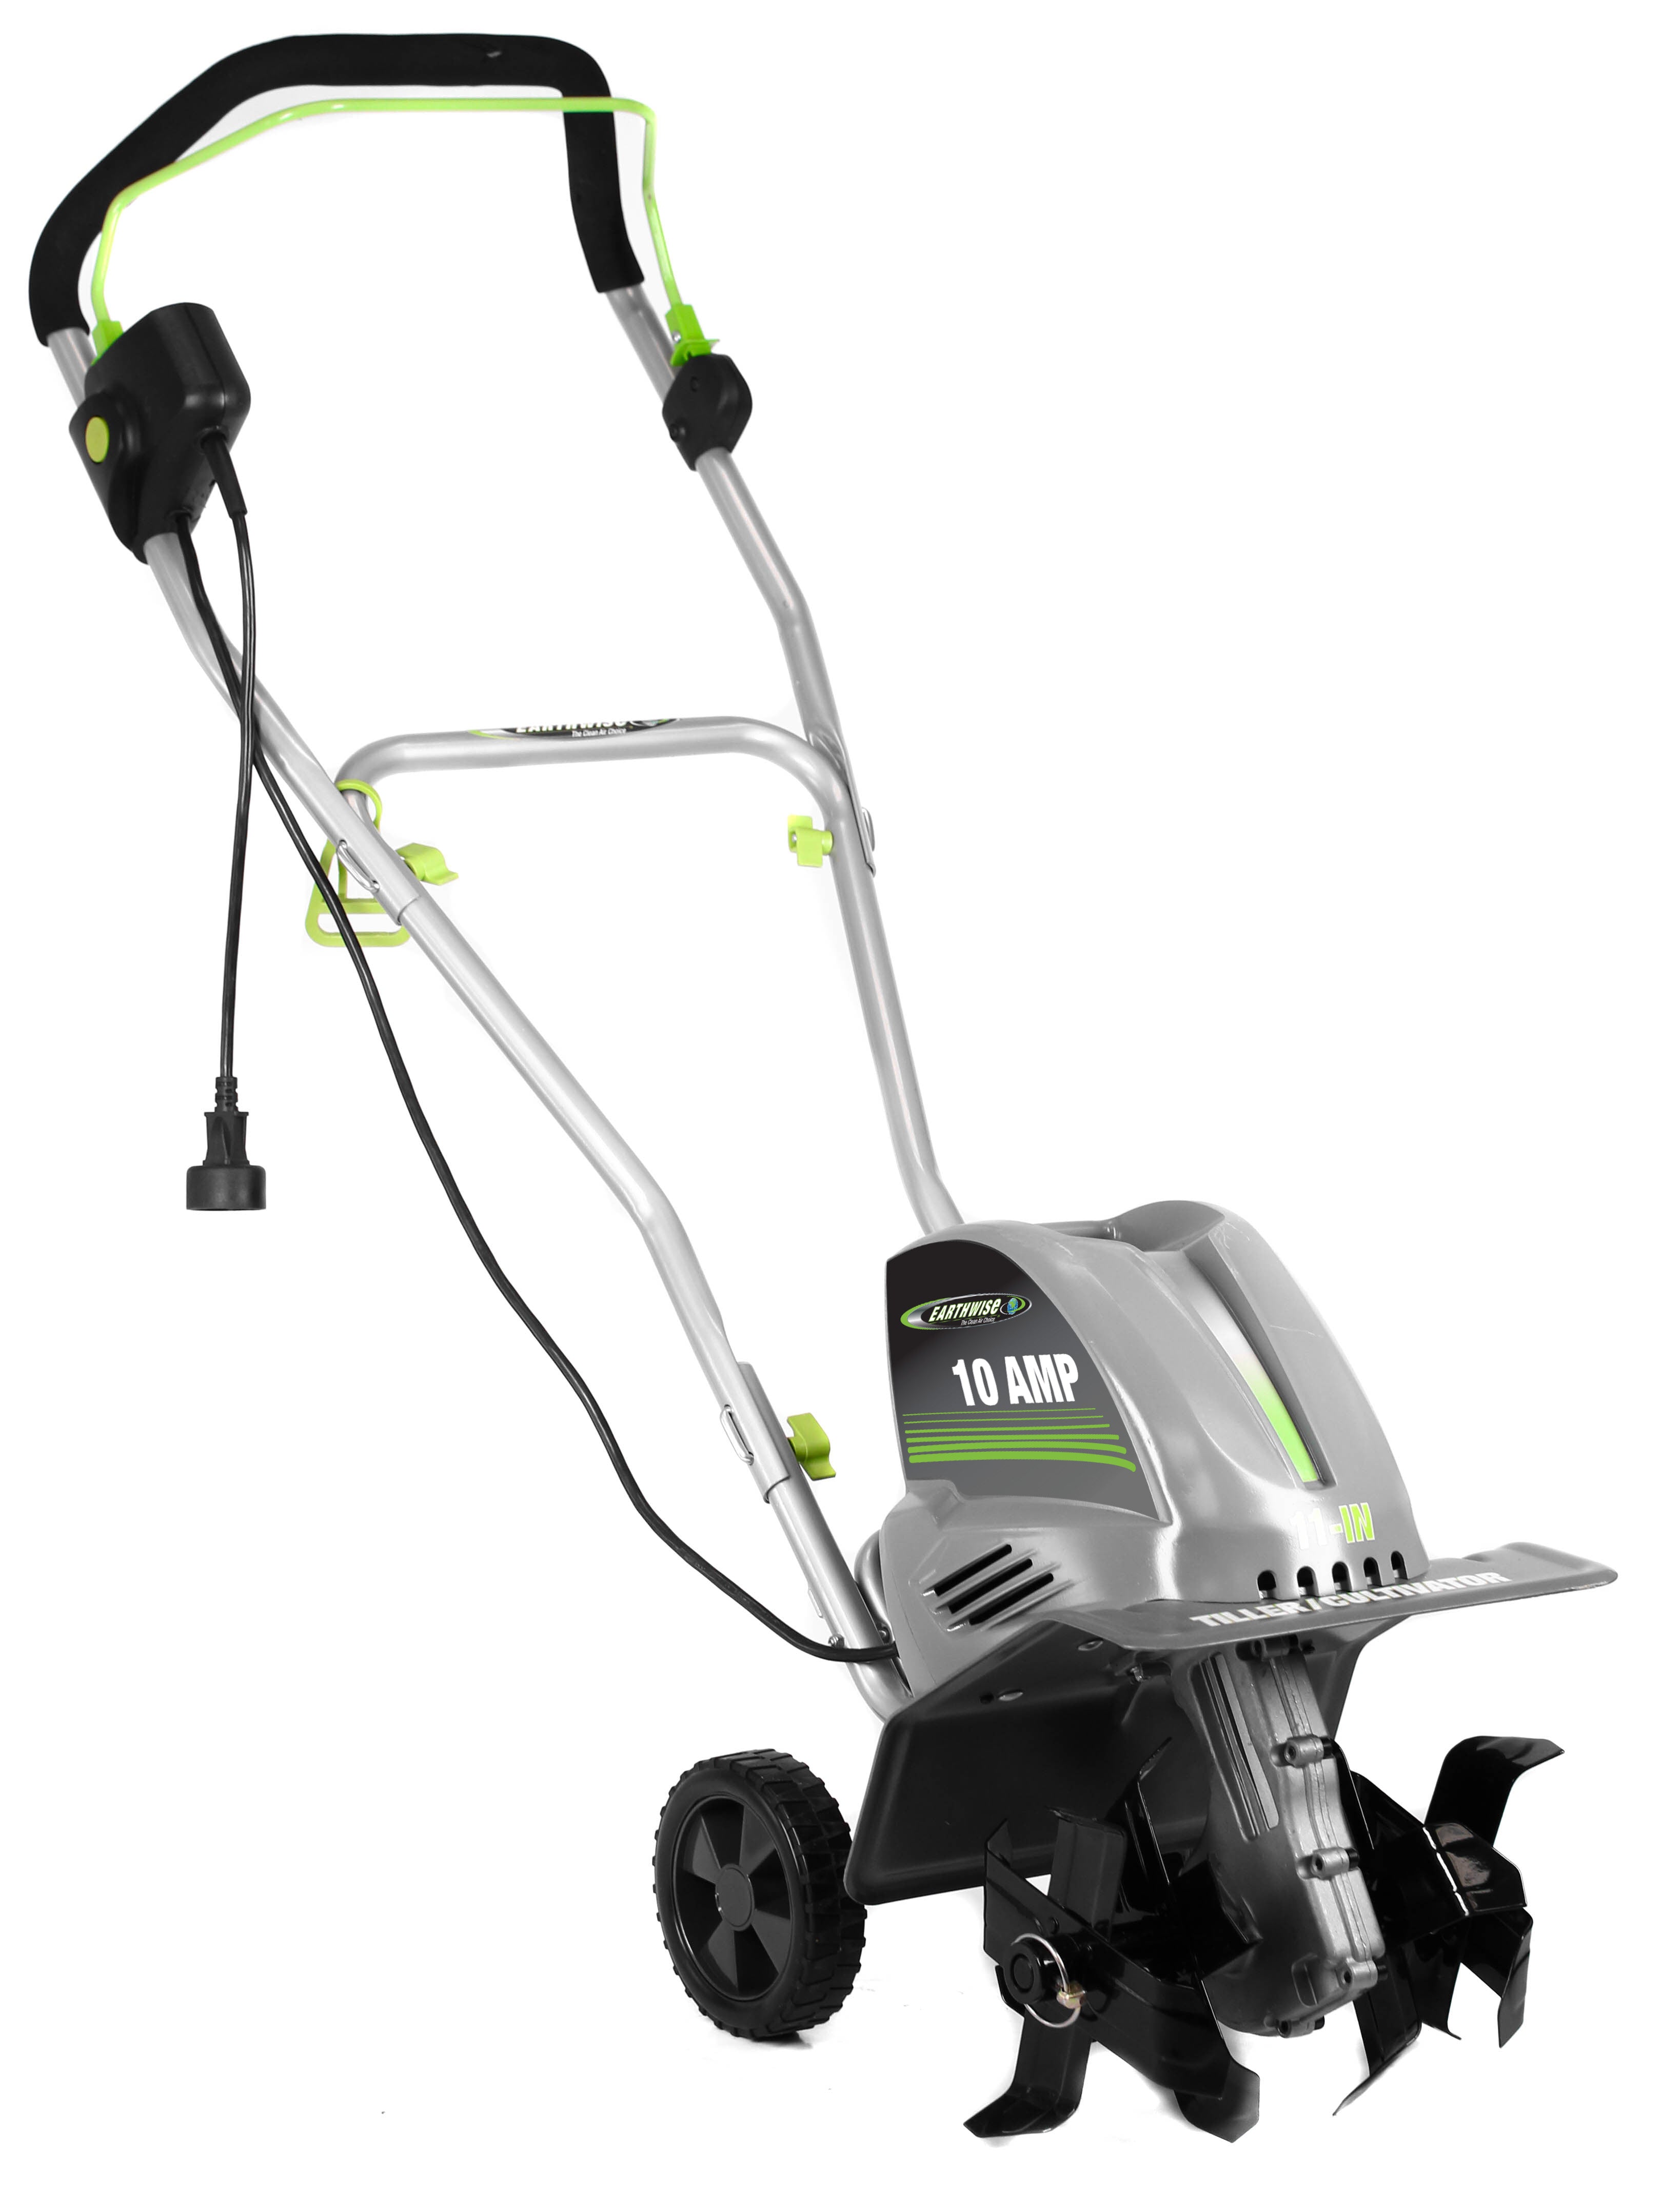 Earthwise Power Tools by ALM 10" 10-Amp 120V Corded Tiller/Cultivator